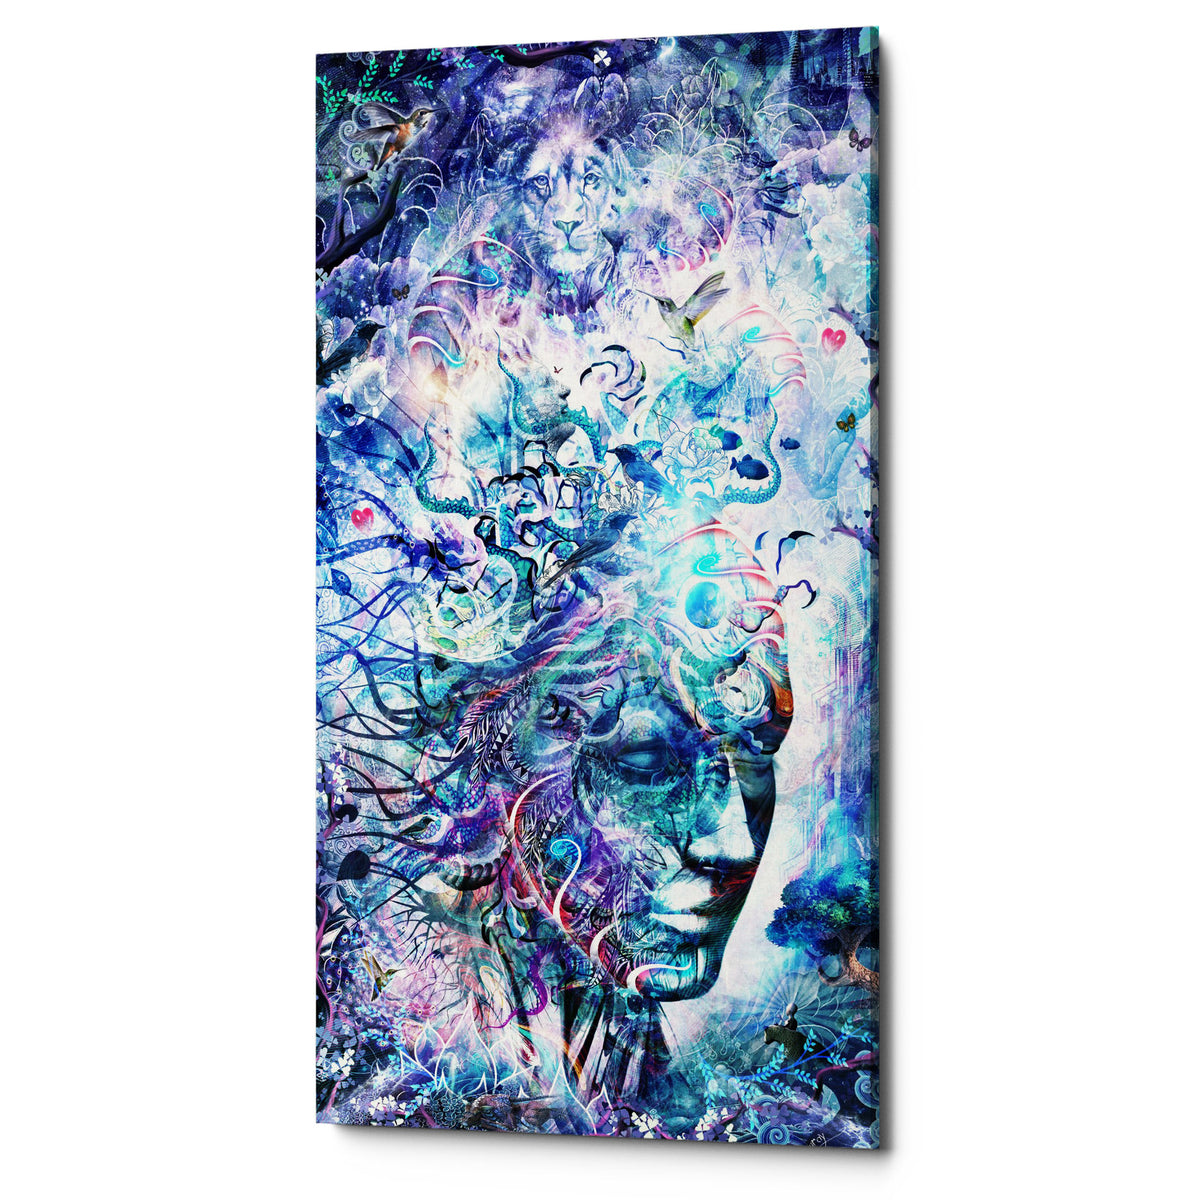 Epic Graffiti &quot;Dreams of Unity&quot; by Cameron Gray, Giclee Canvas Wall Art